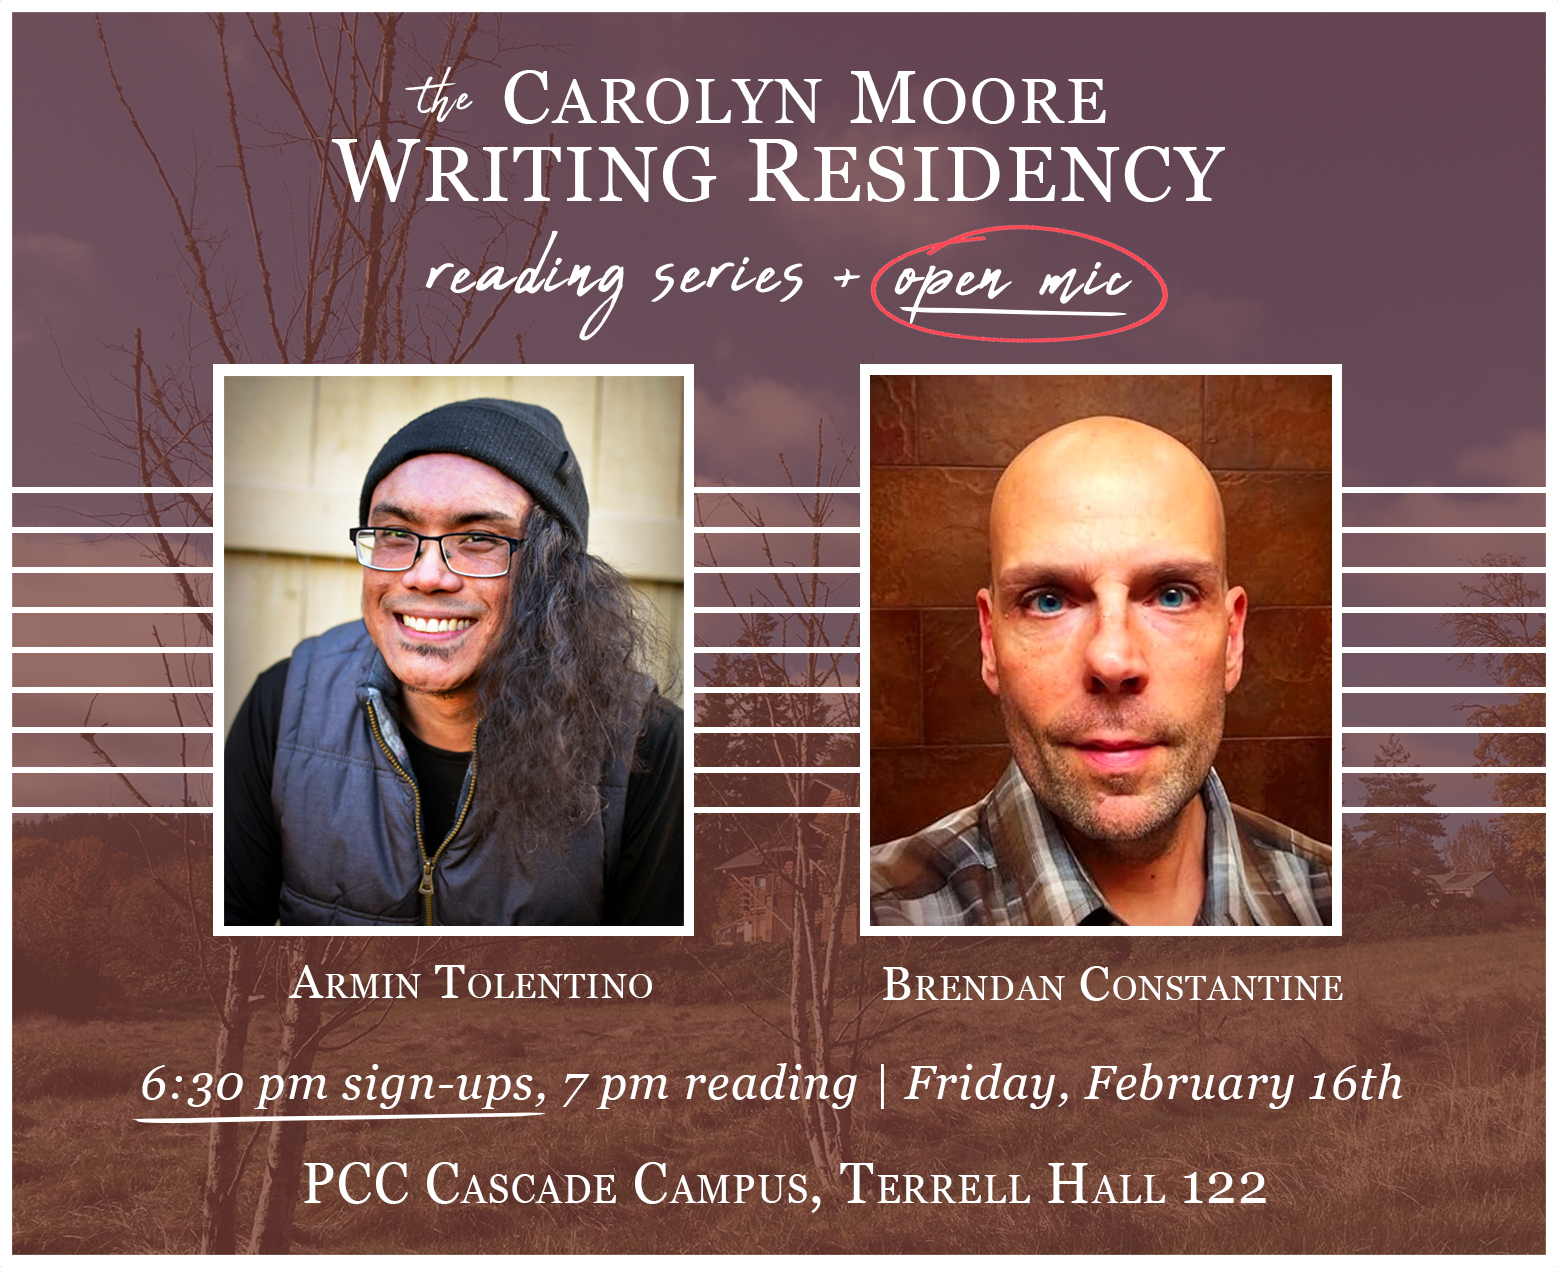 a poster featuring information about an upcoming reading/open-mic on Friday, Feb. 16 at 7 p.m. featuring headshots of two poets, Armin Tolentino and Brendan Constantine